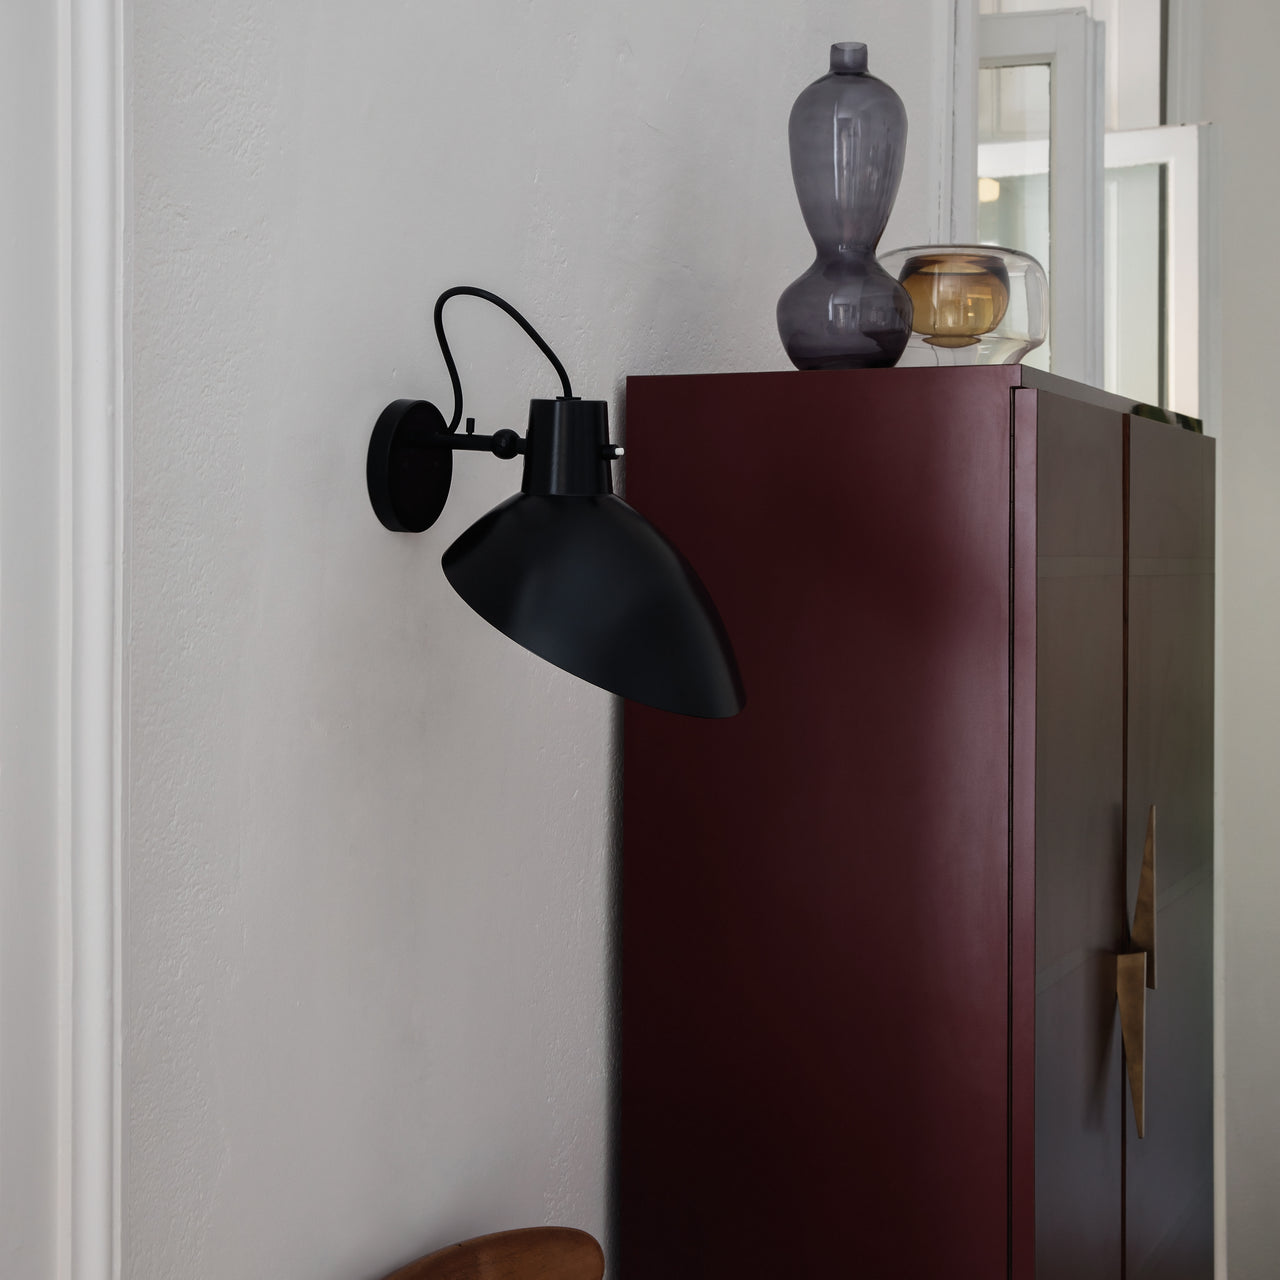 VV Cinquanta Wall Lamp with Switch